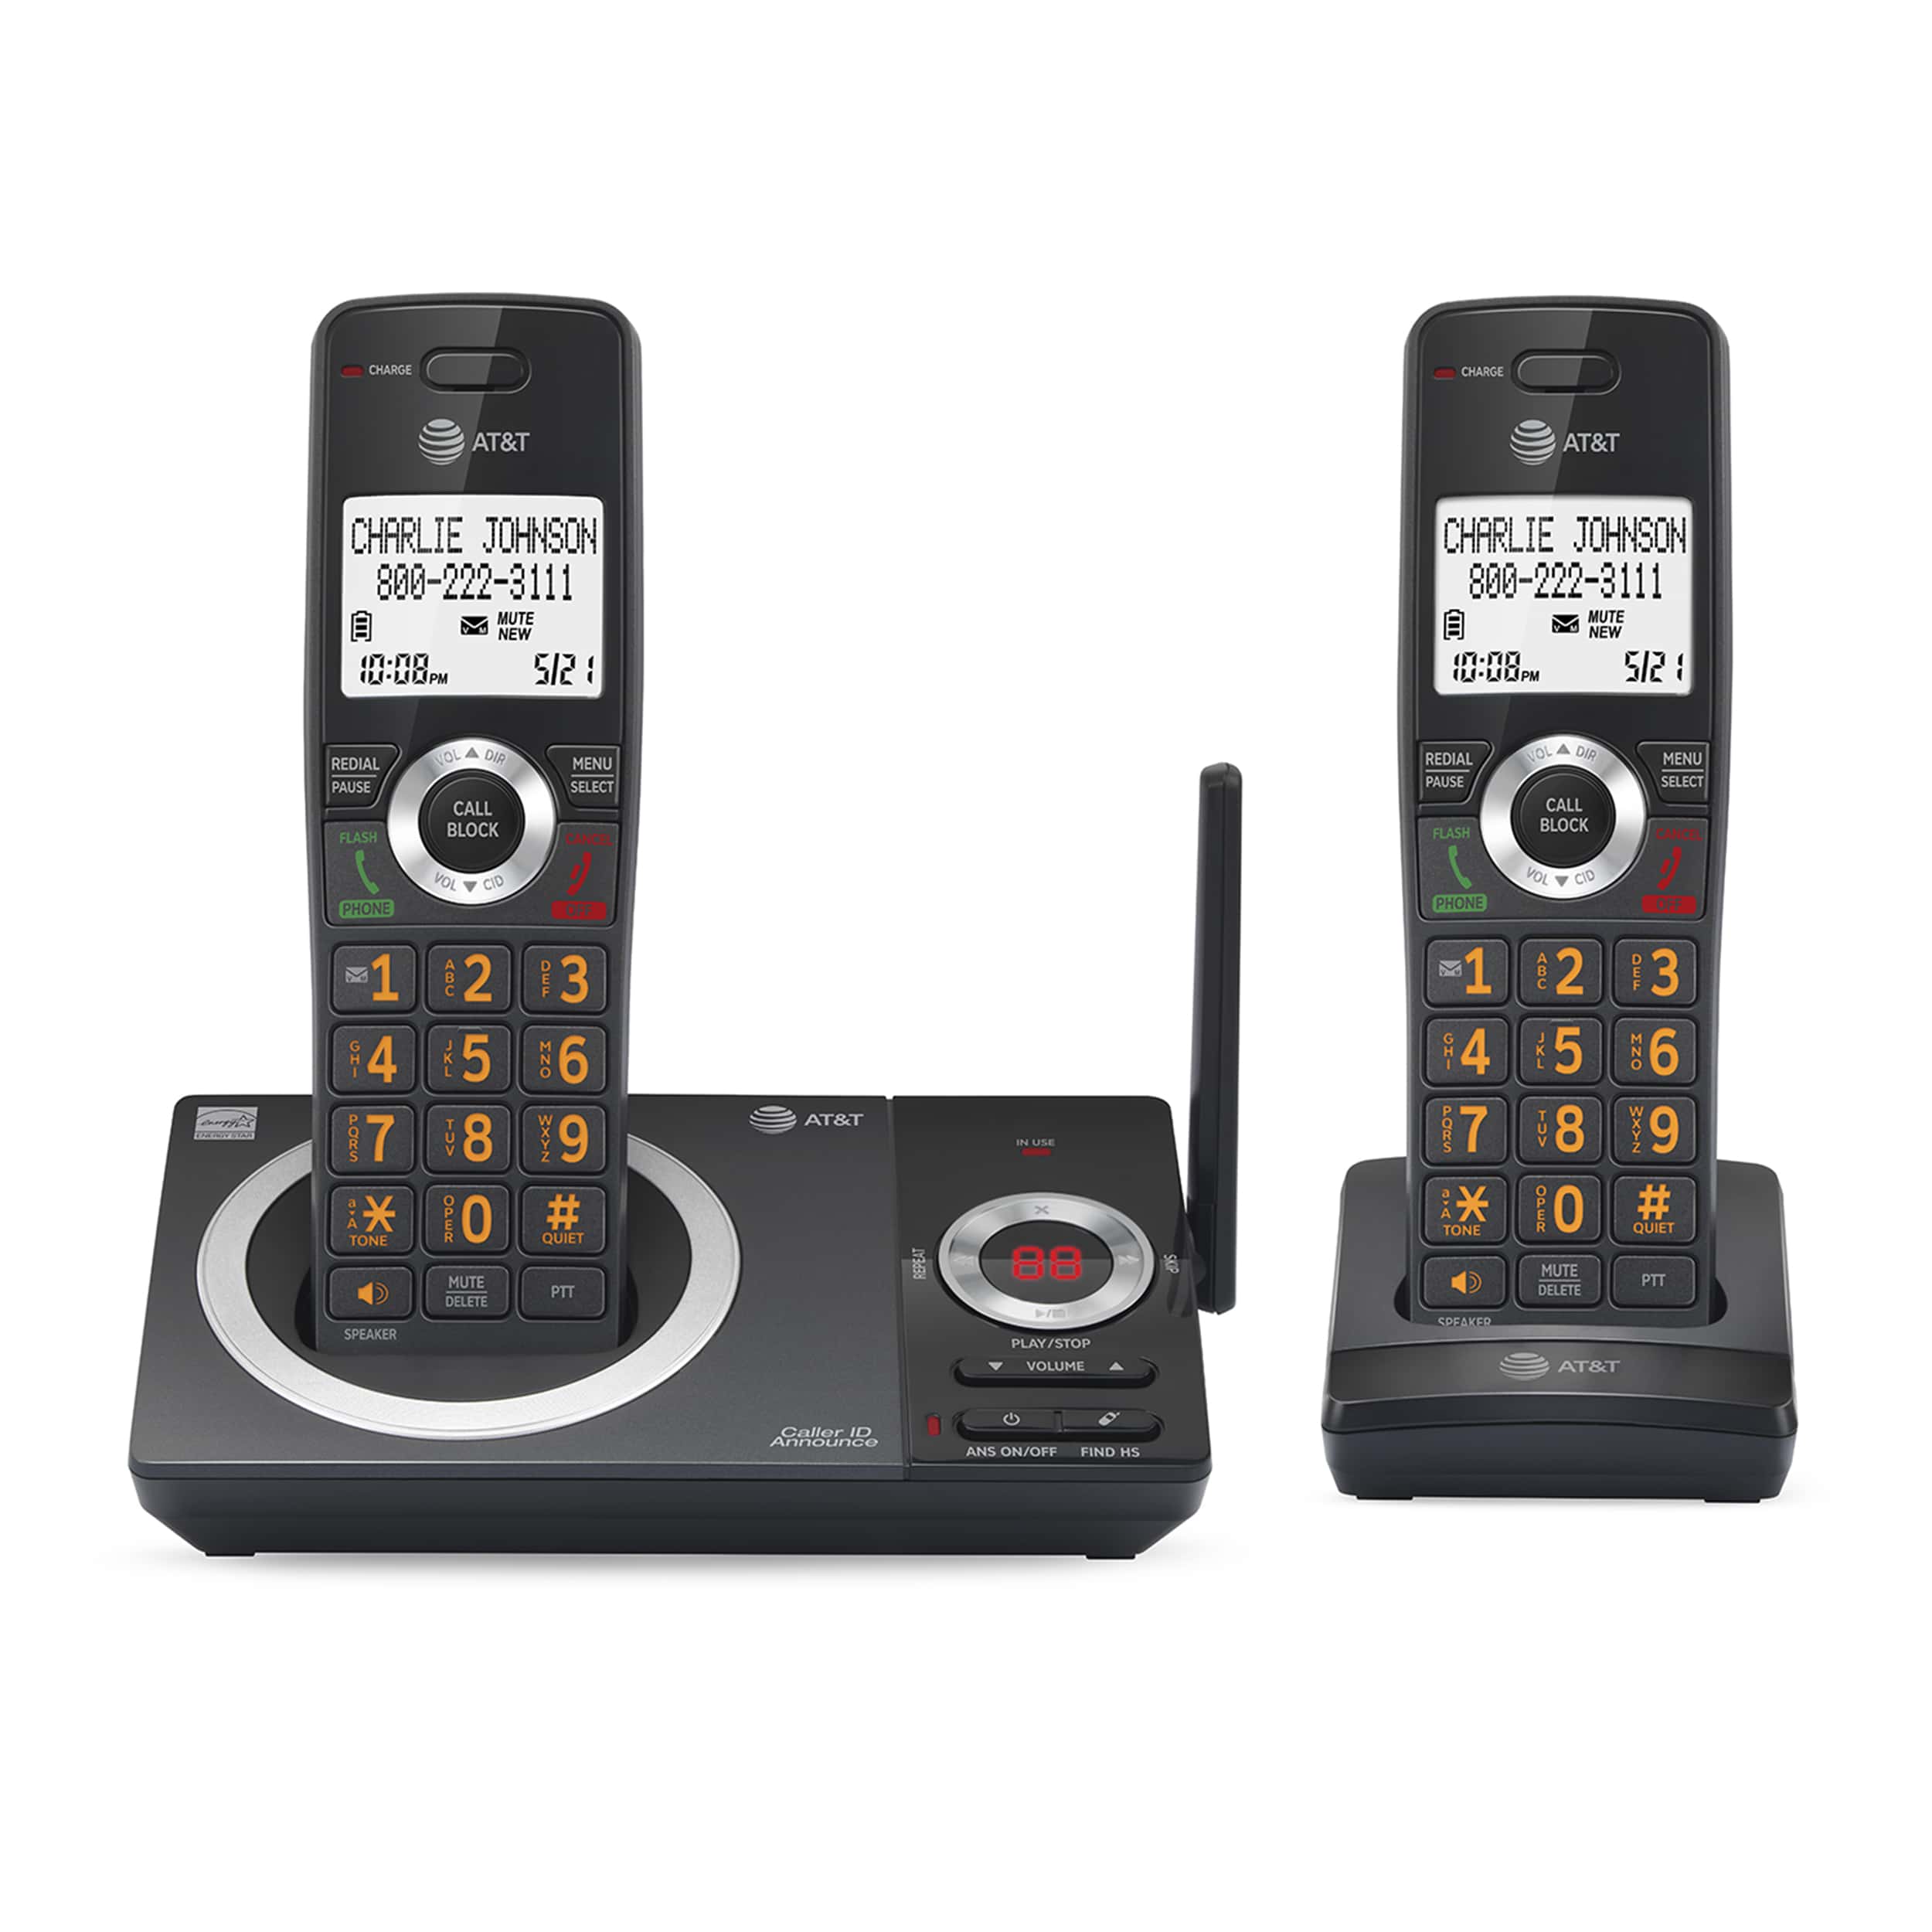 2-Handset Expandable Cordless Phone with Unsurpassed Range, Smart Call Blocker and Answering System - view 1